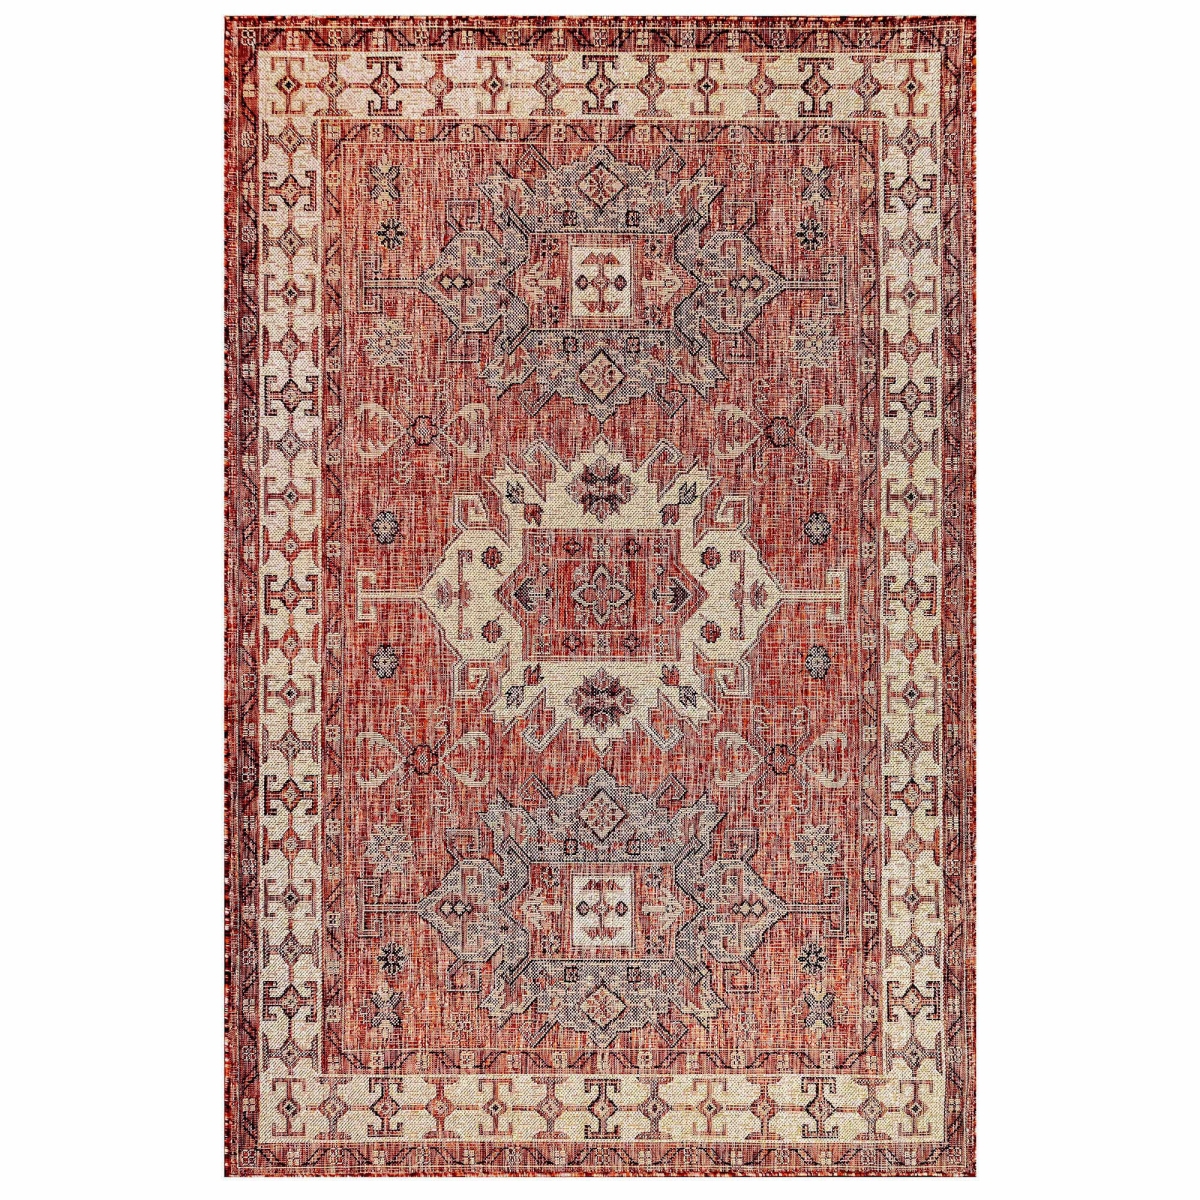 Trans-ocean Imports Cre69840924 6 Ft. 6 In. X 9 Ft. 4 In. Liora Manne Carmel Kilim Indoor & Outdoor Rug Wilton Woven Rectangular Rug - Red